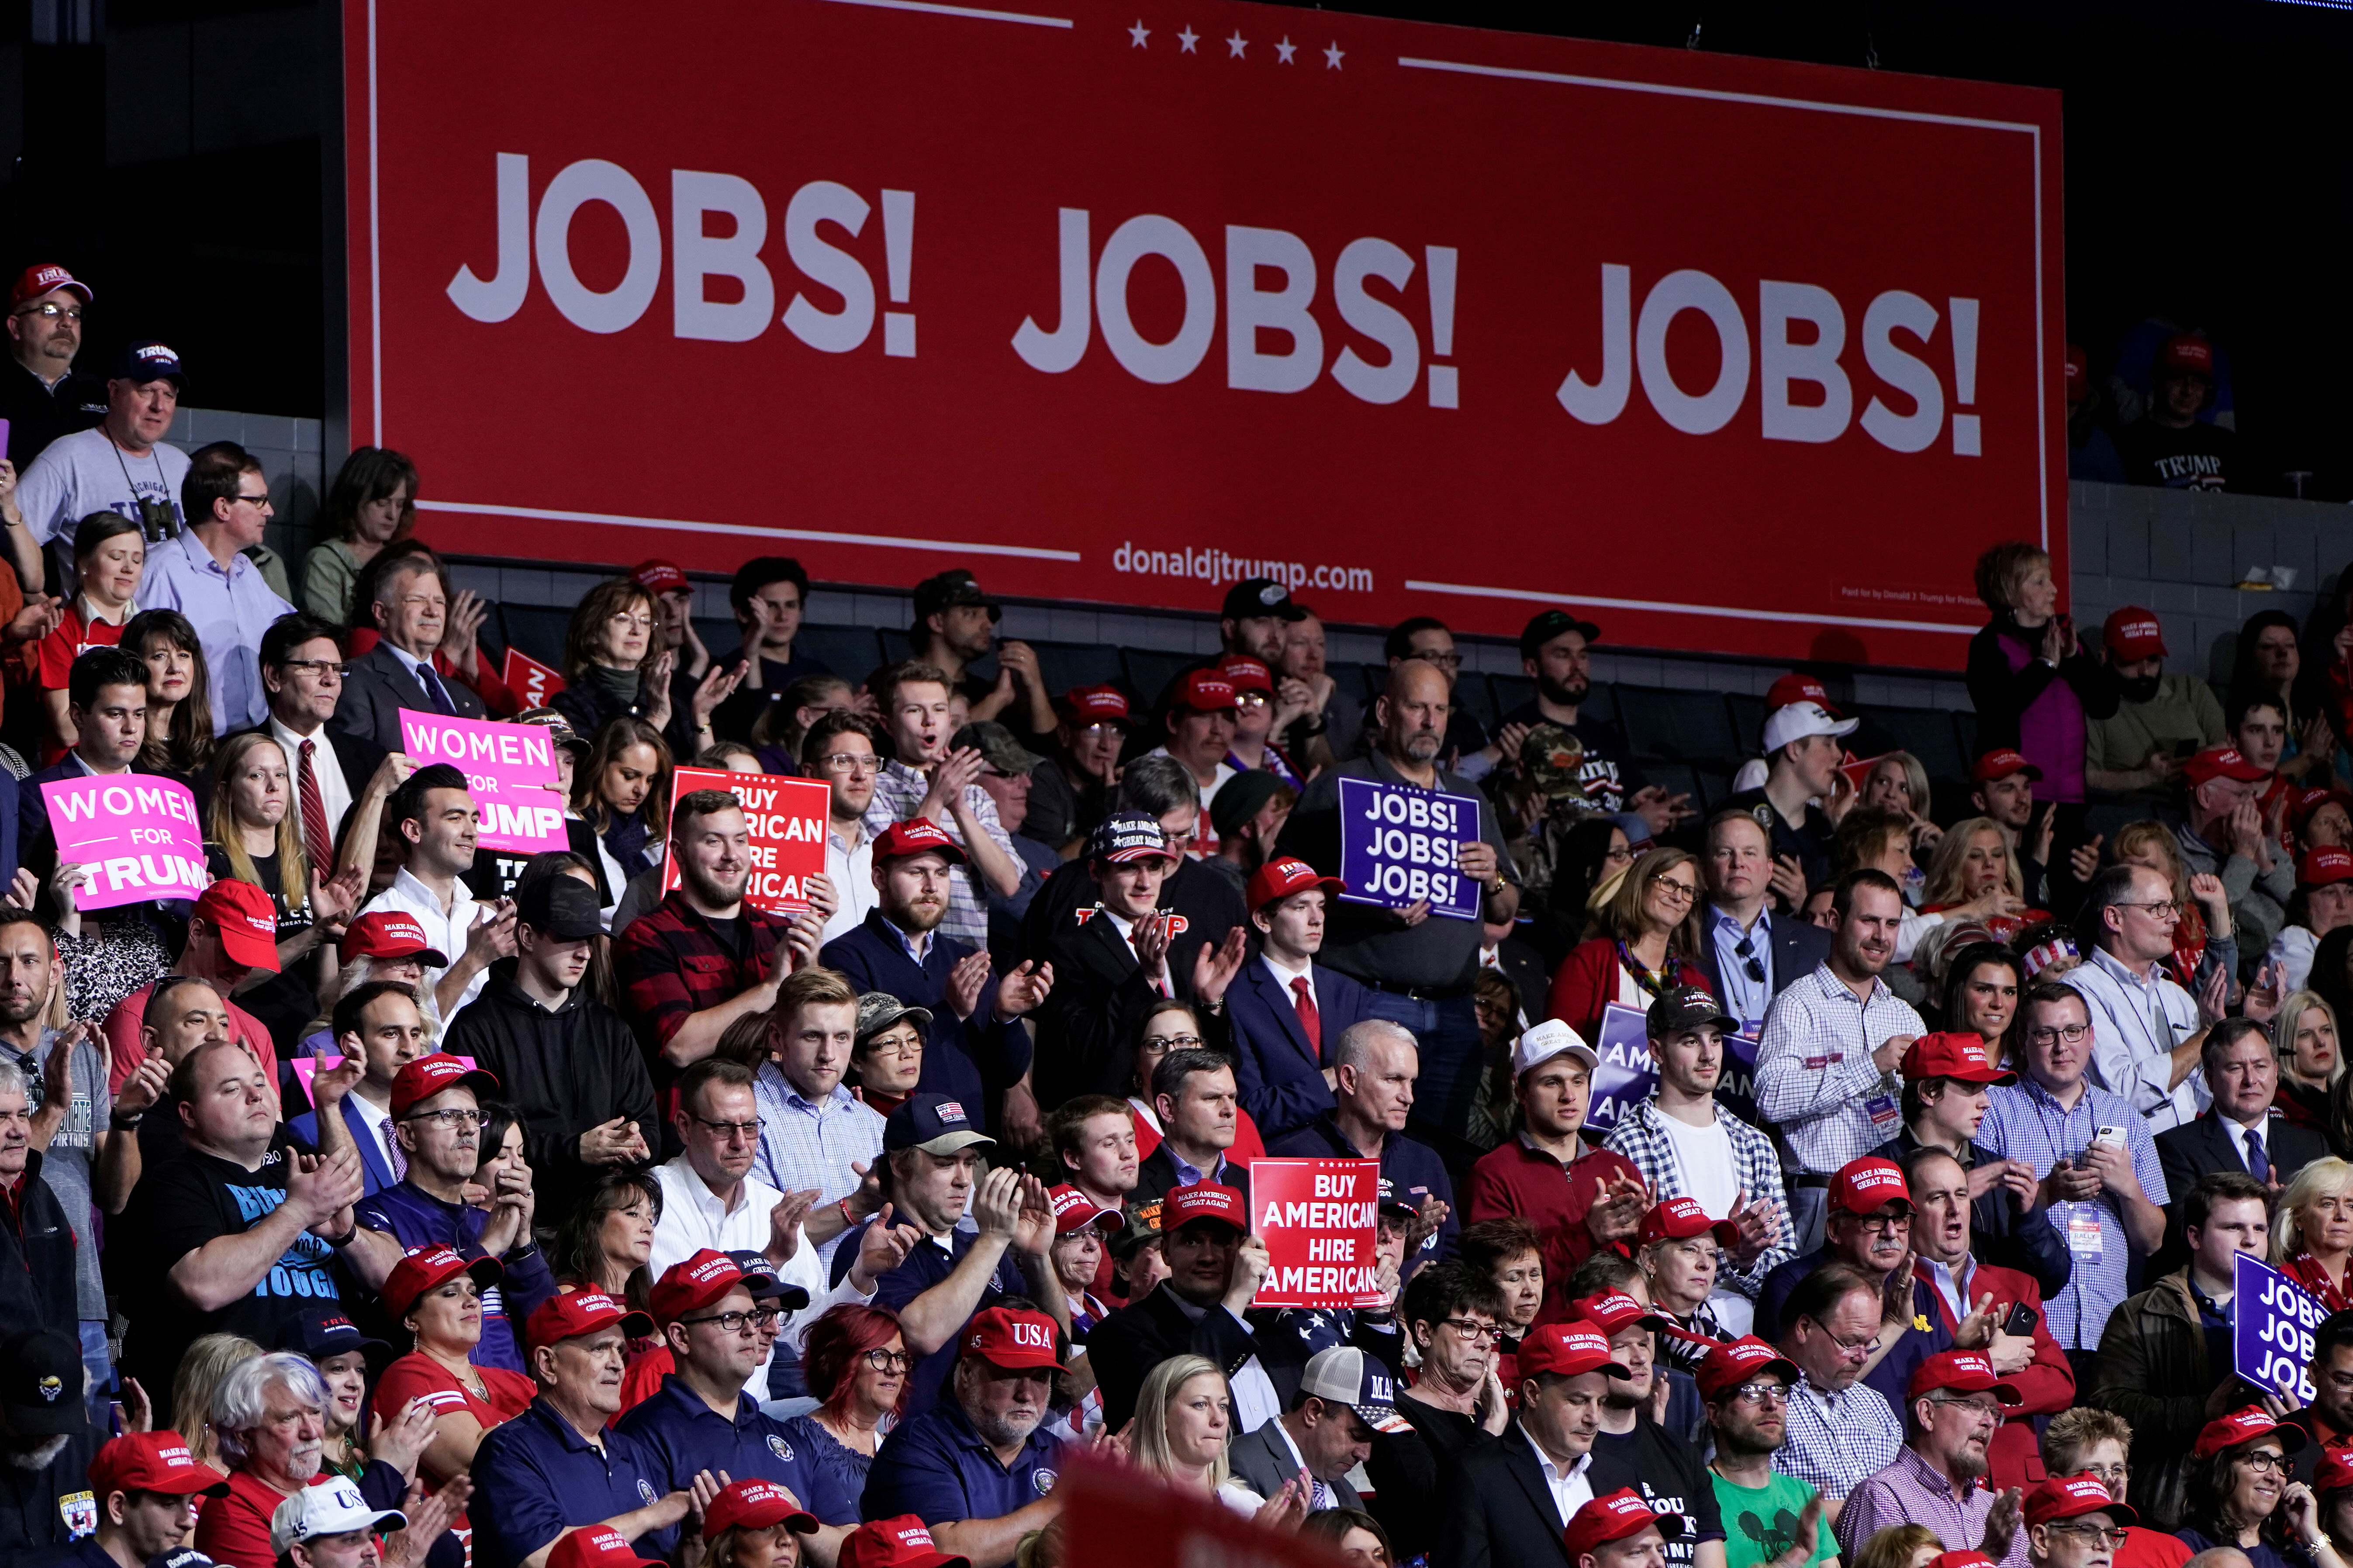 Supporters cheer U.S. President Donald Trump as he speaks during a campaign rally in Grand Rapids, Michigan, U.S., March 28, 2019. REUTERS/Joshua Roberts